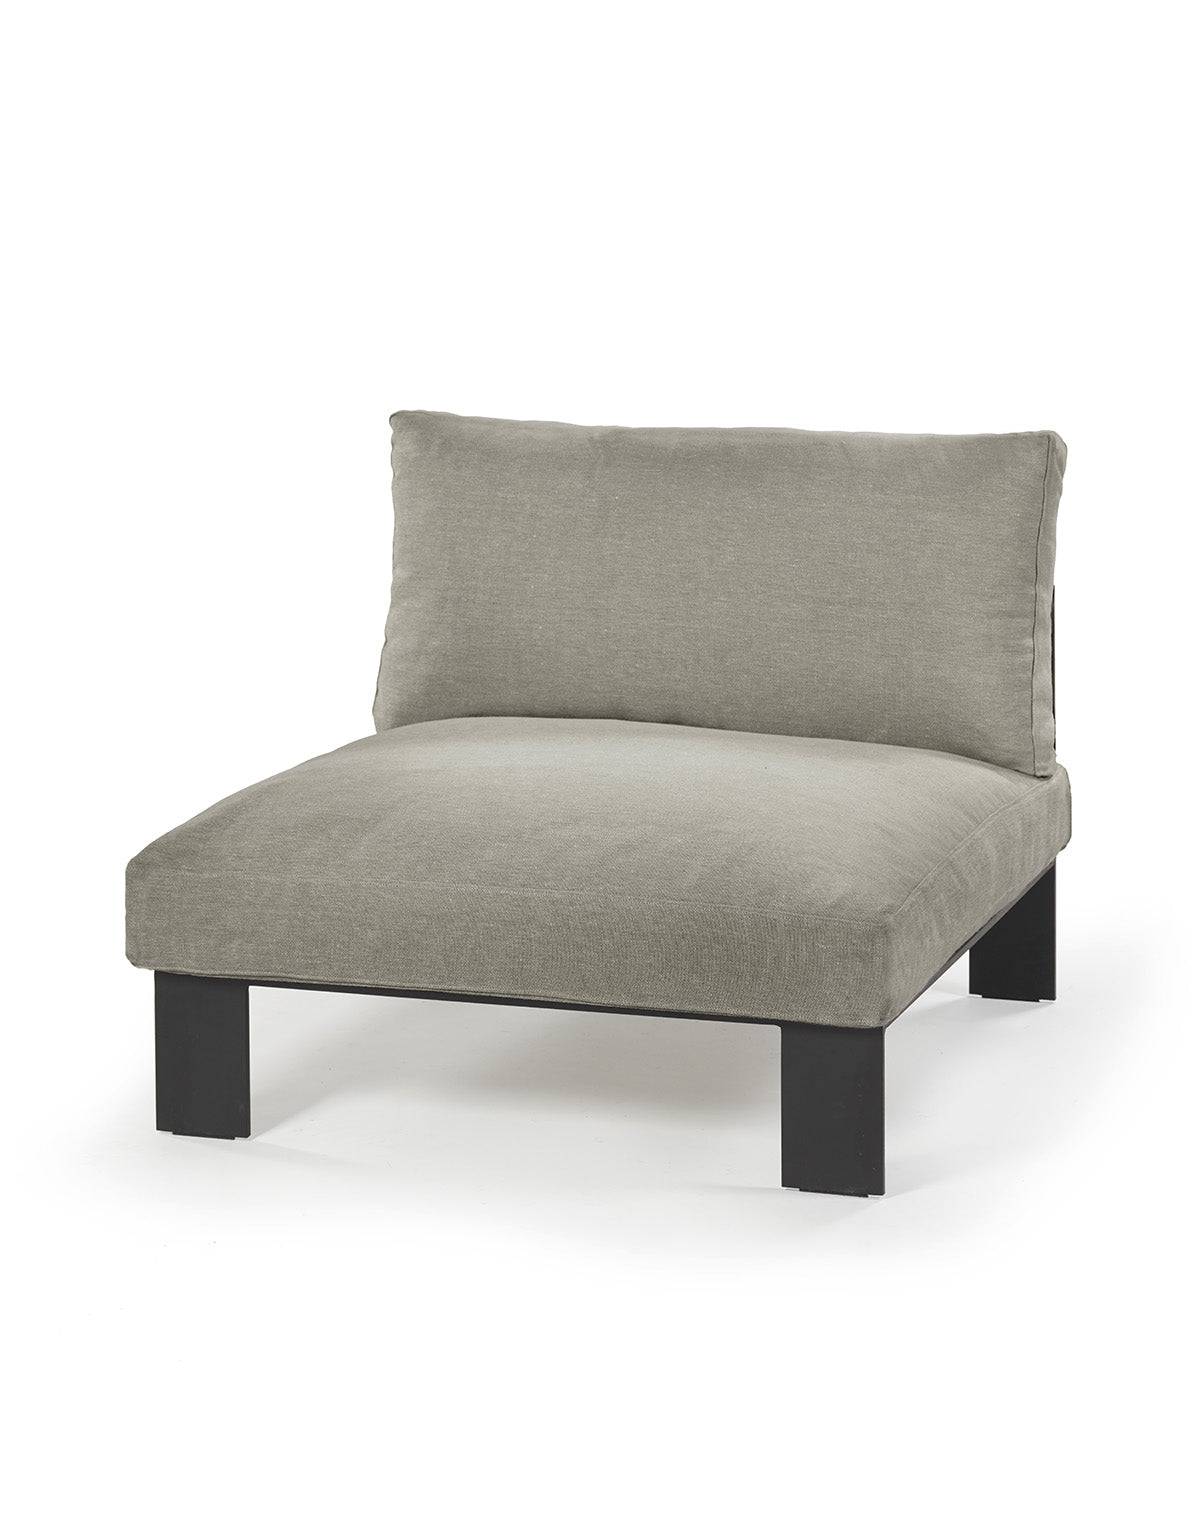 Mombaers Lounge Chair - Taupe - THAT COOL LIVING